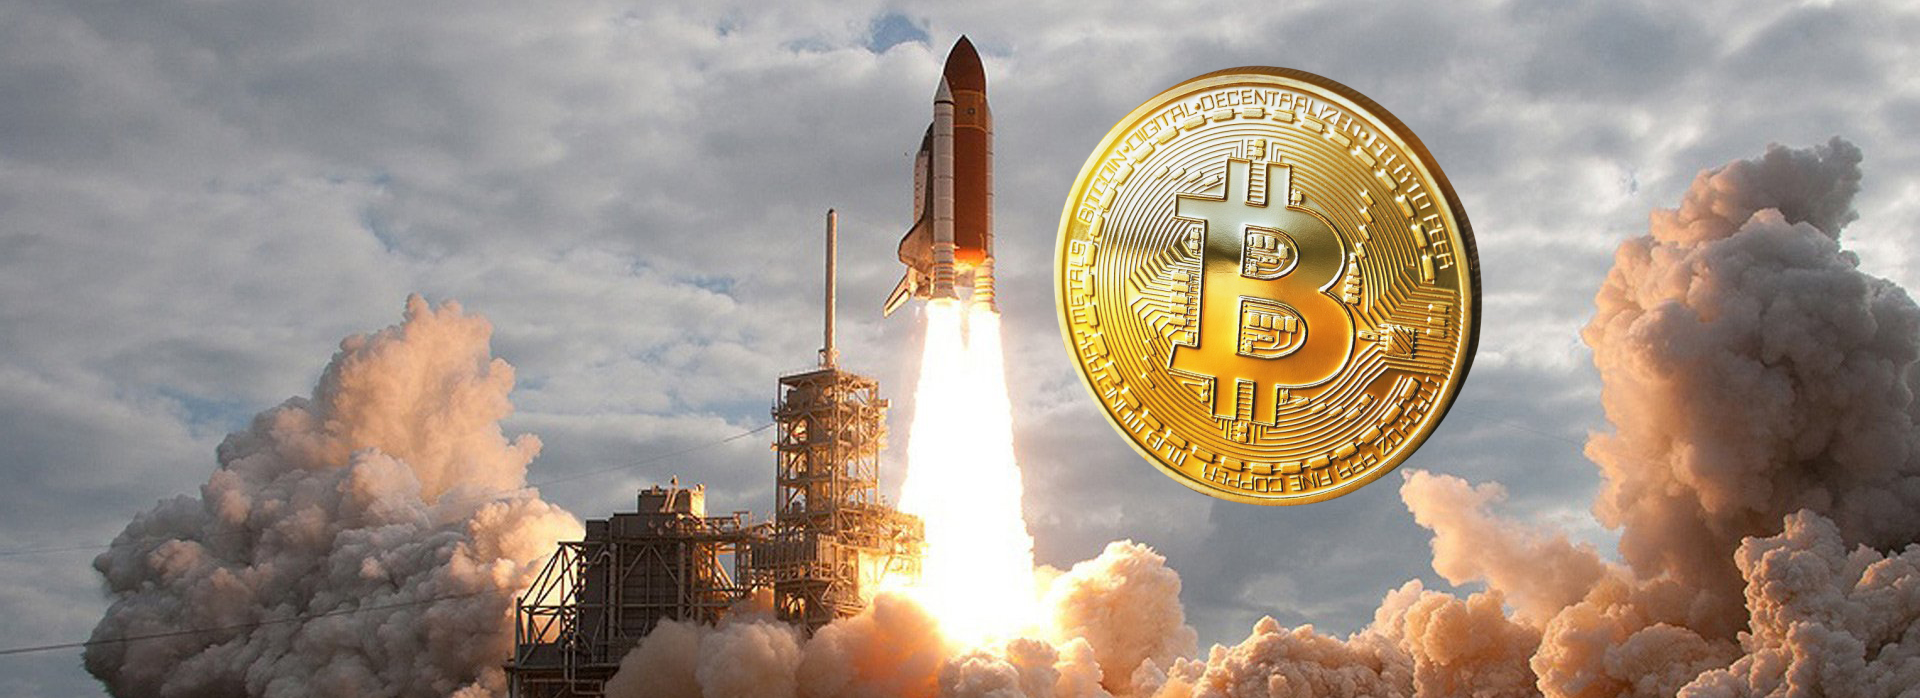 Cryptocurrency market overview - Bitcoin can "fly up to the moon"